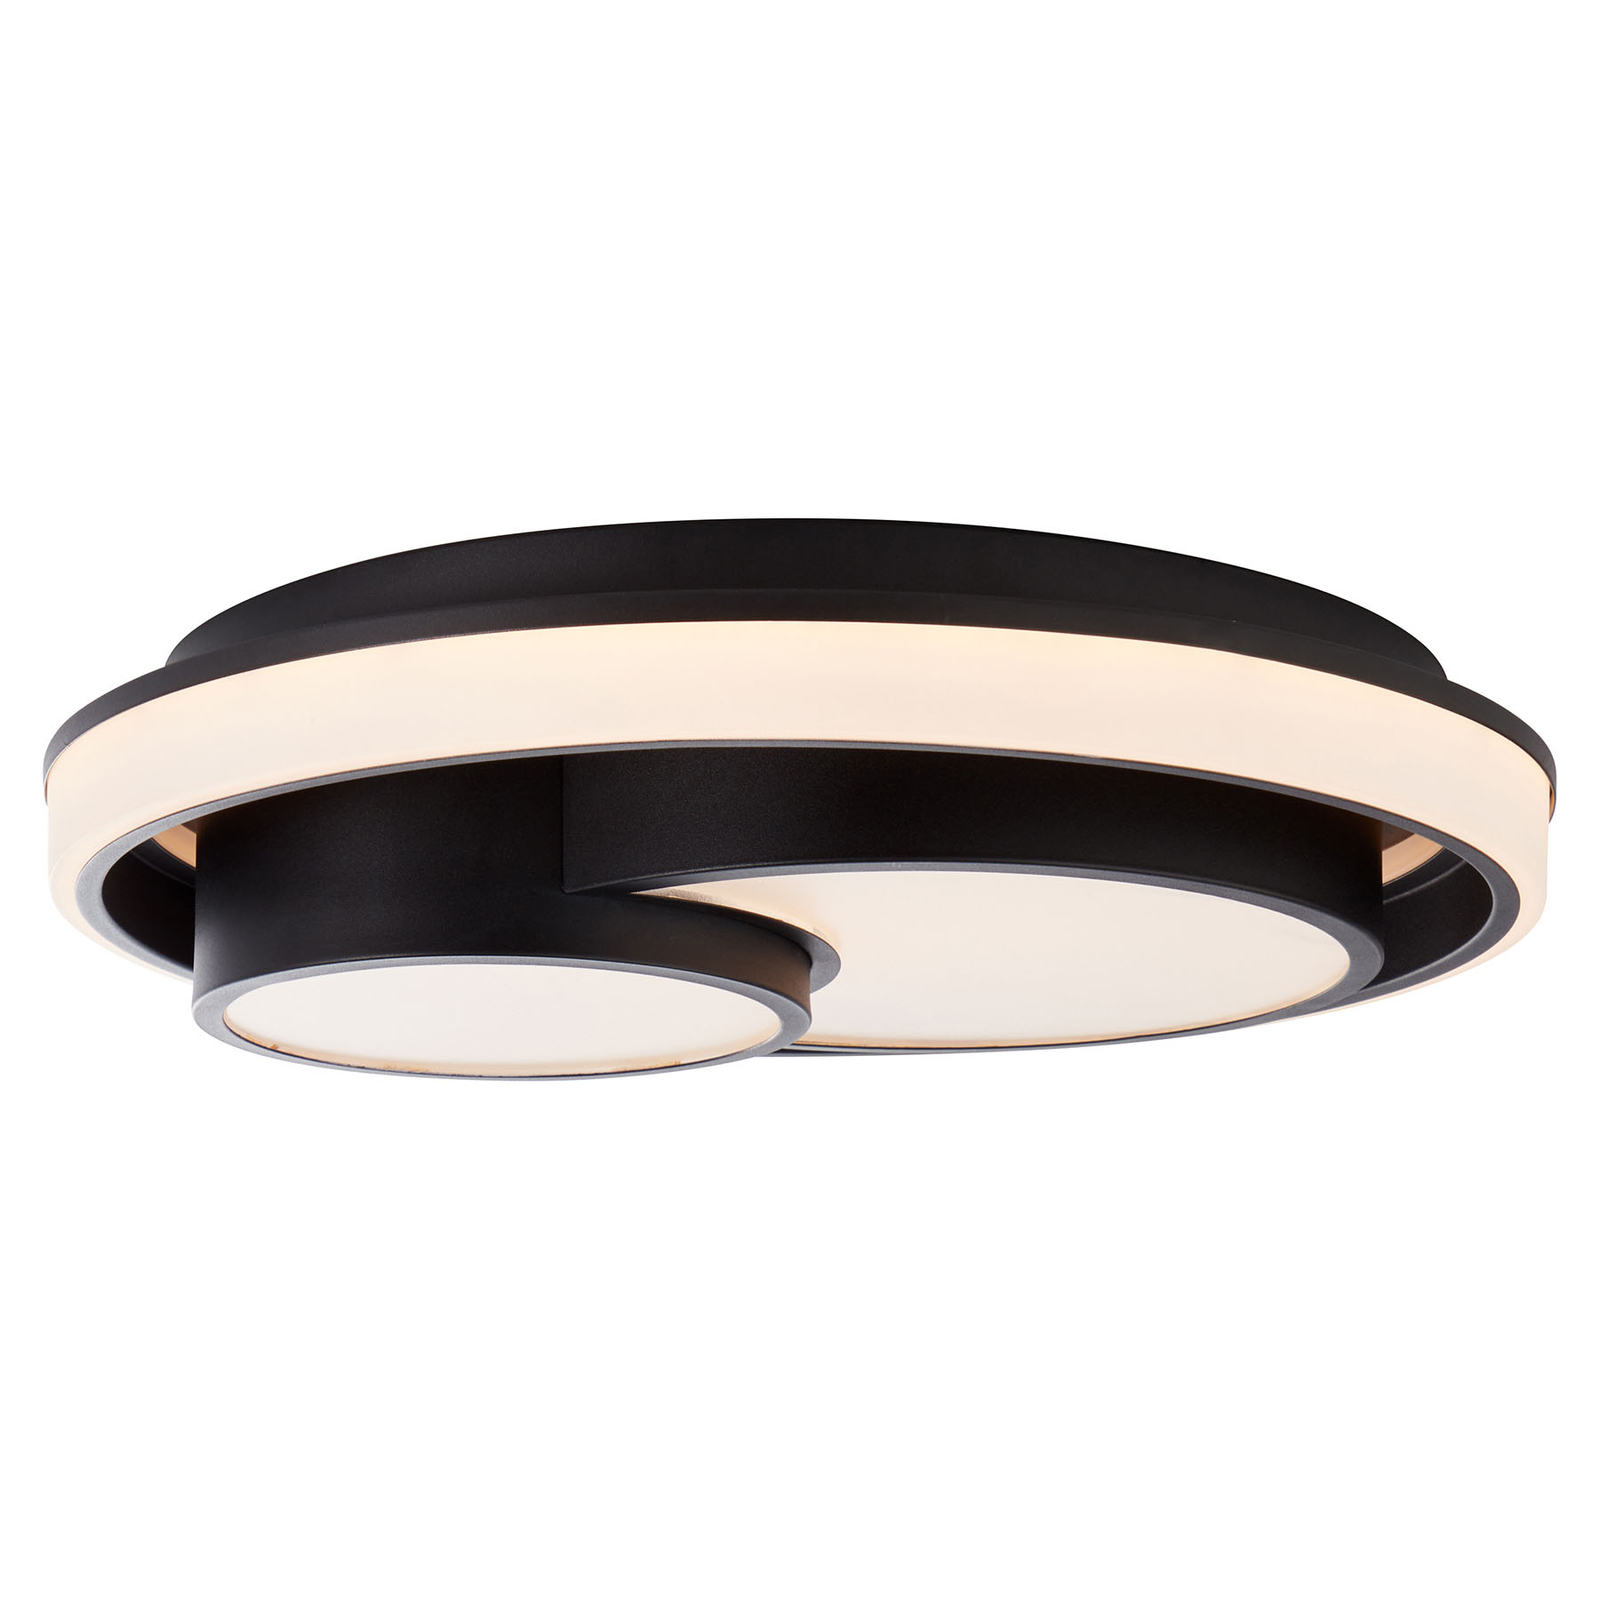 AEG Dwain LED ceiling light, dimmable, CCT, remote